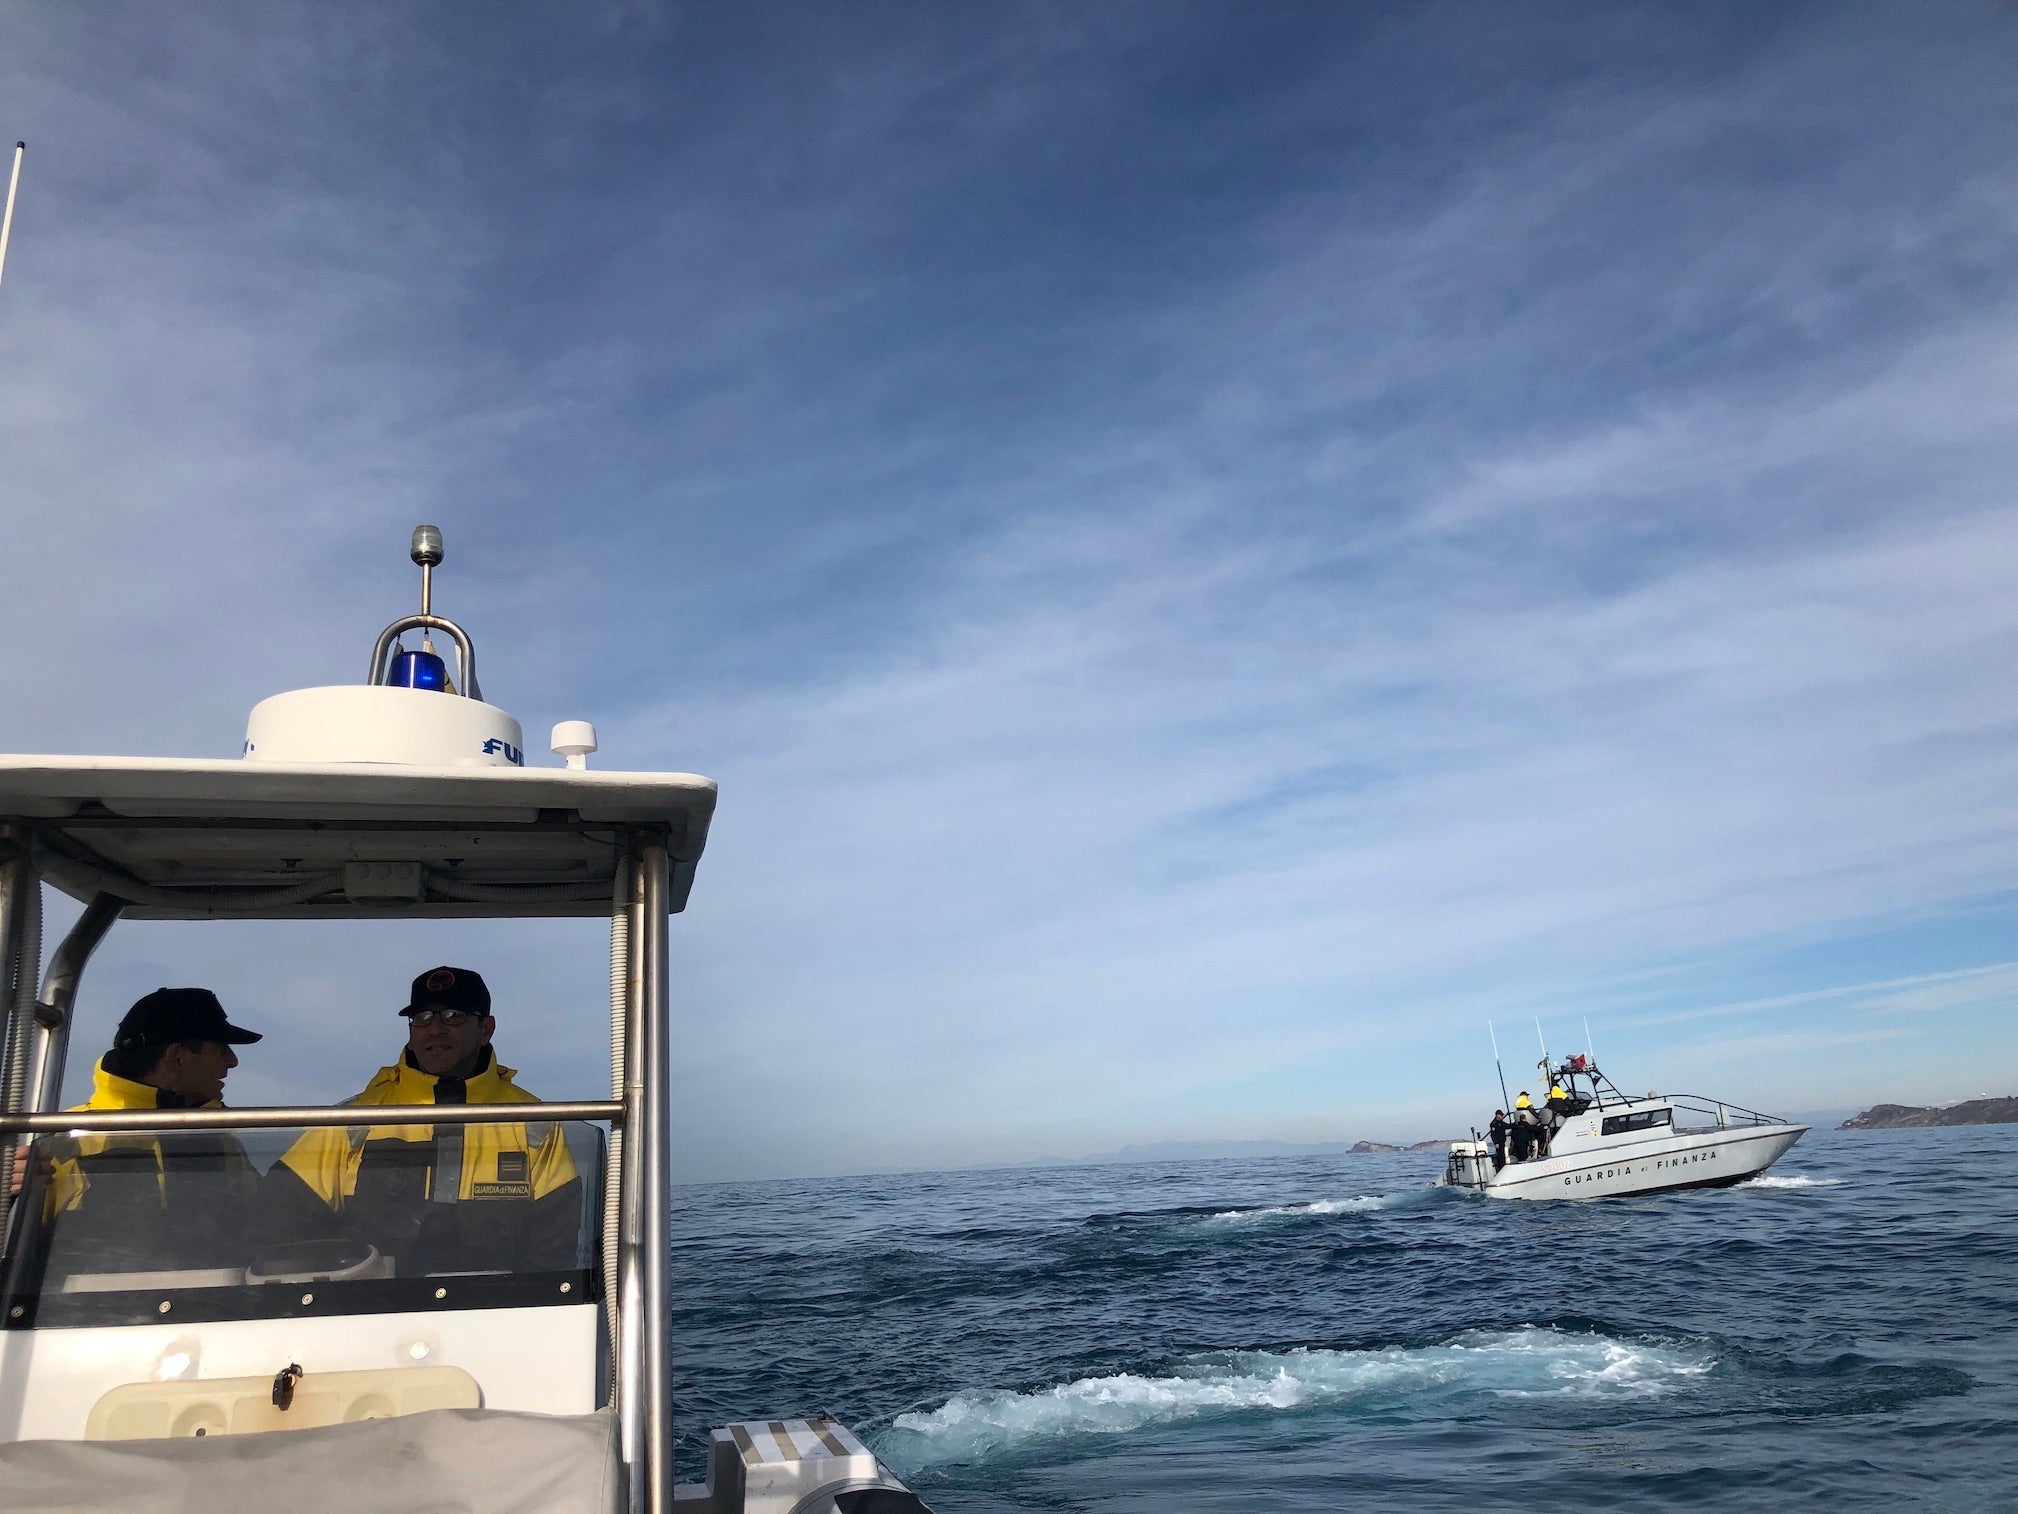 A joint patrol by the Albanian and Italian coast guard off the coast of Durres in the Adriatic Sea